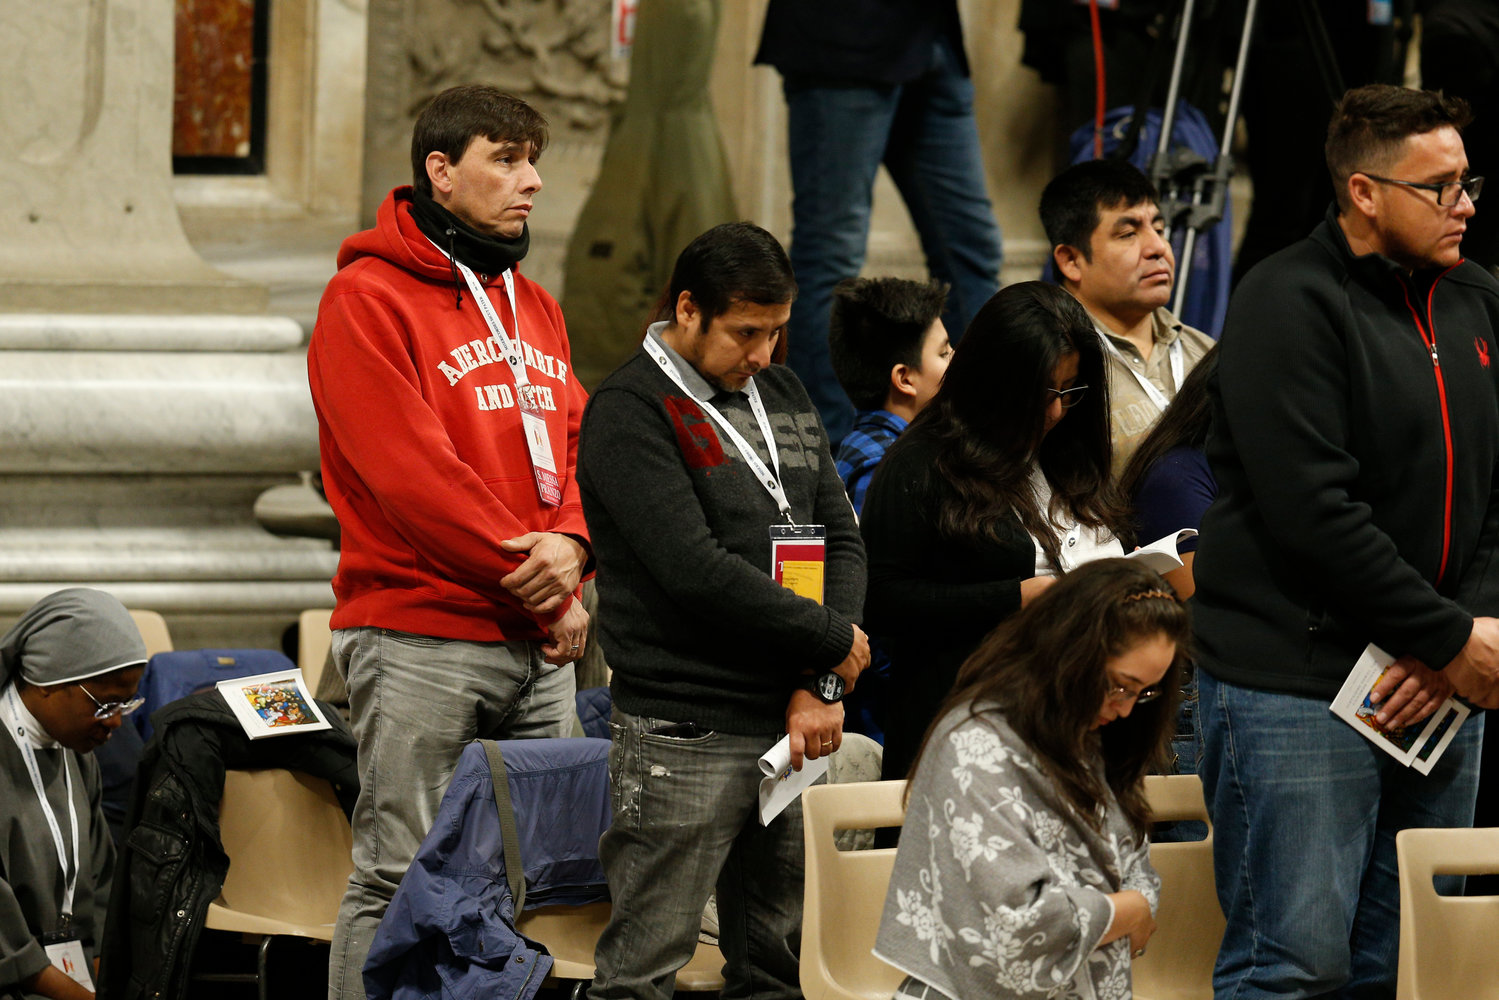 People attend Mass celebrated by Pope Francis to mark World Day of the Poor in St. Peter’s Basilica at the Vatican Nov. 17, 2019. After the Mass the Pope at lunch with hundreds of poor people. (CNS photo/Paul Haring) See POPE-POOR Nov. 17, 2019.in St. Peter’s Basilica at the Vatican Nov. 17, 2019. After the Mass the Pope at lunch with hundreds of poor people.